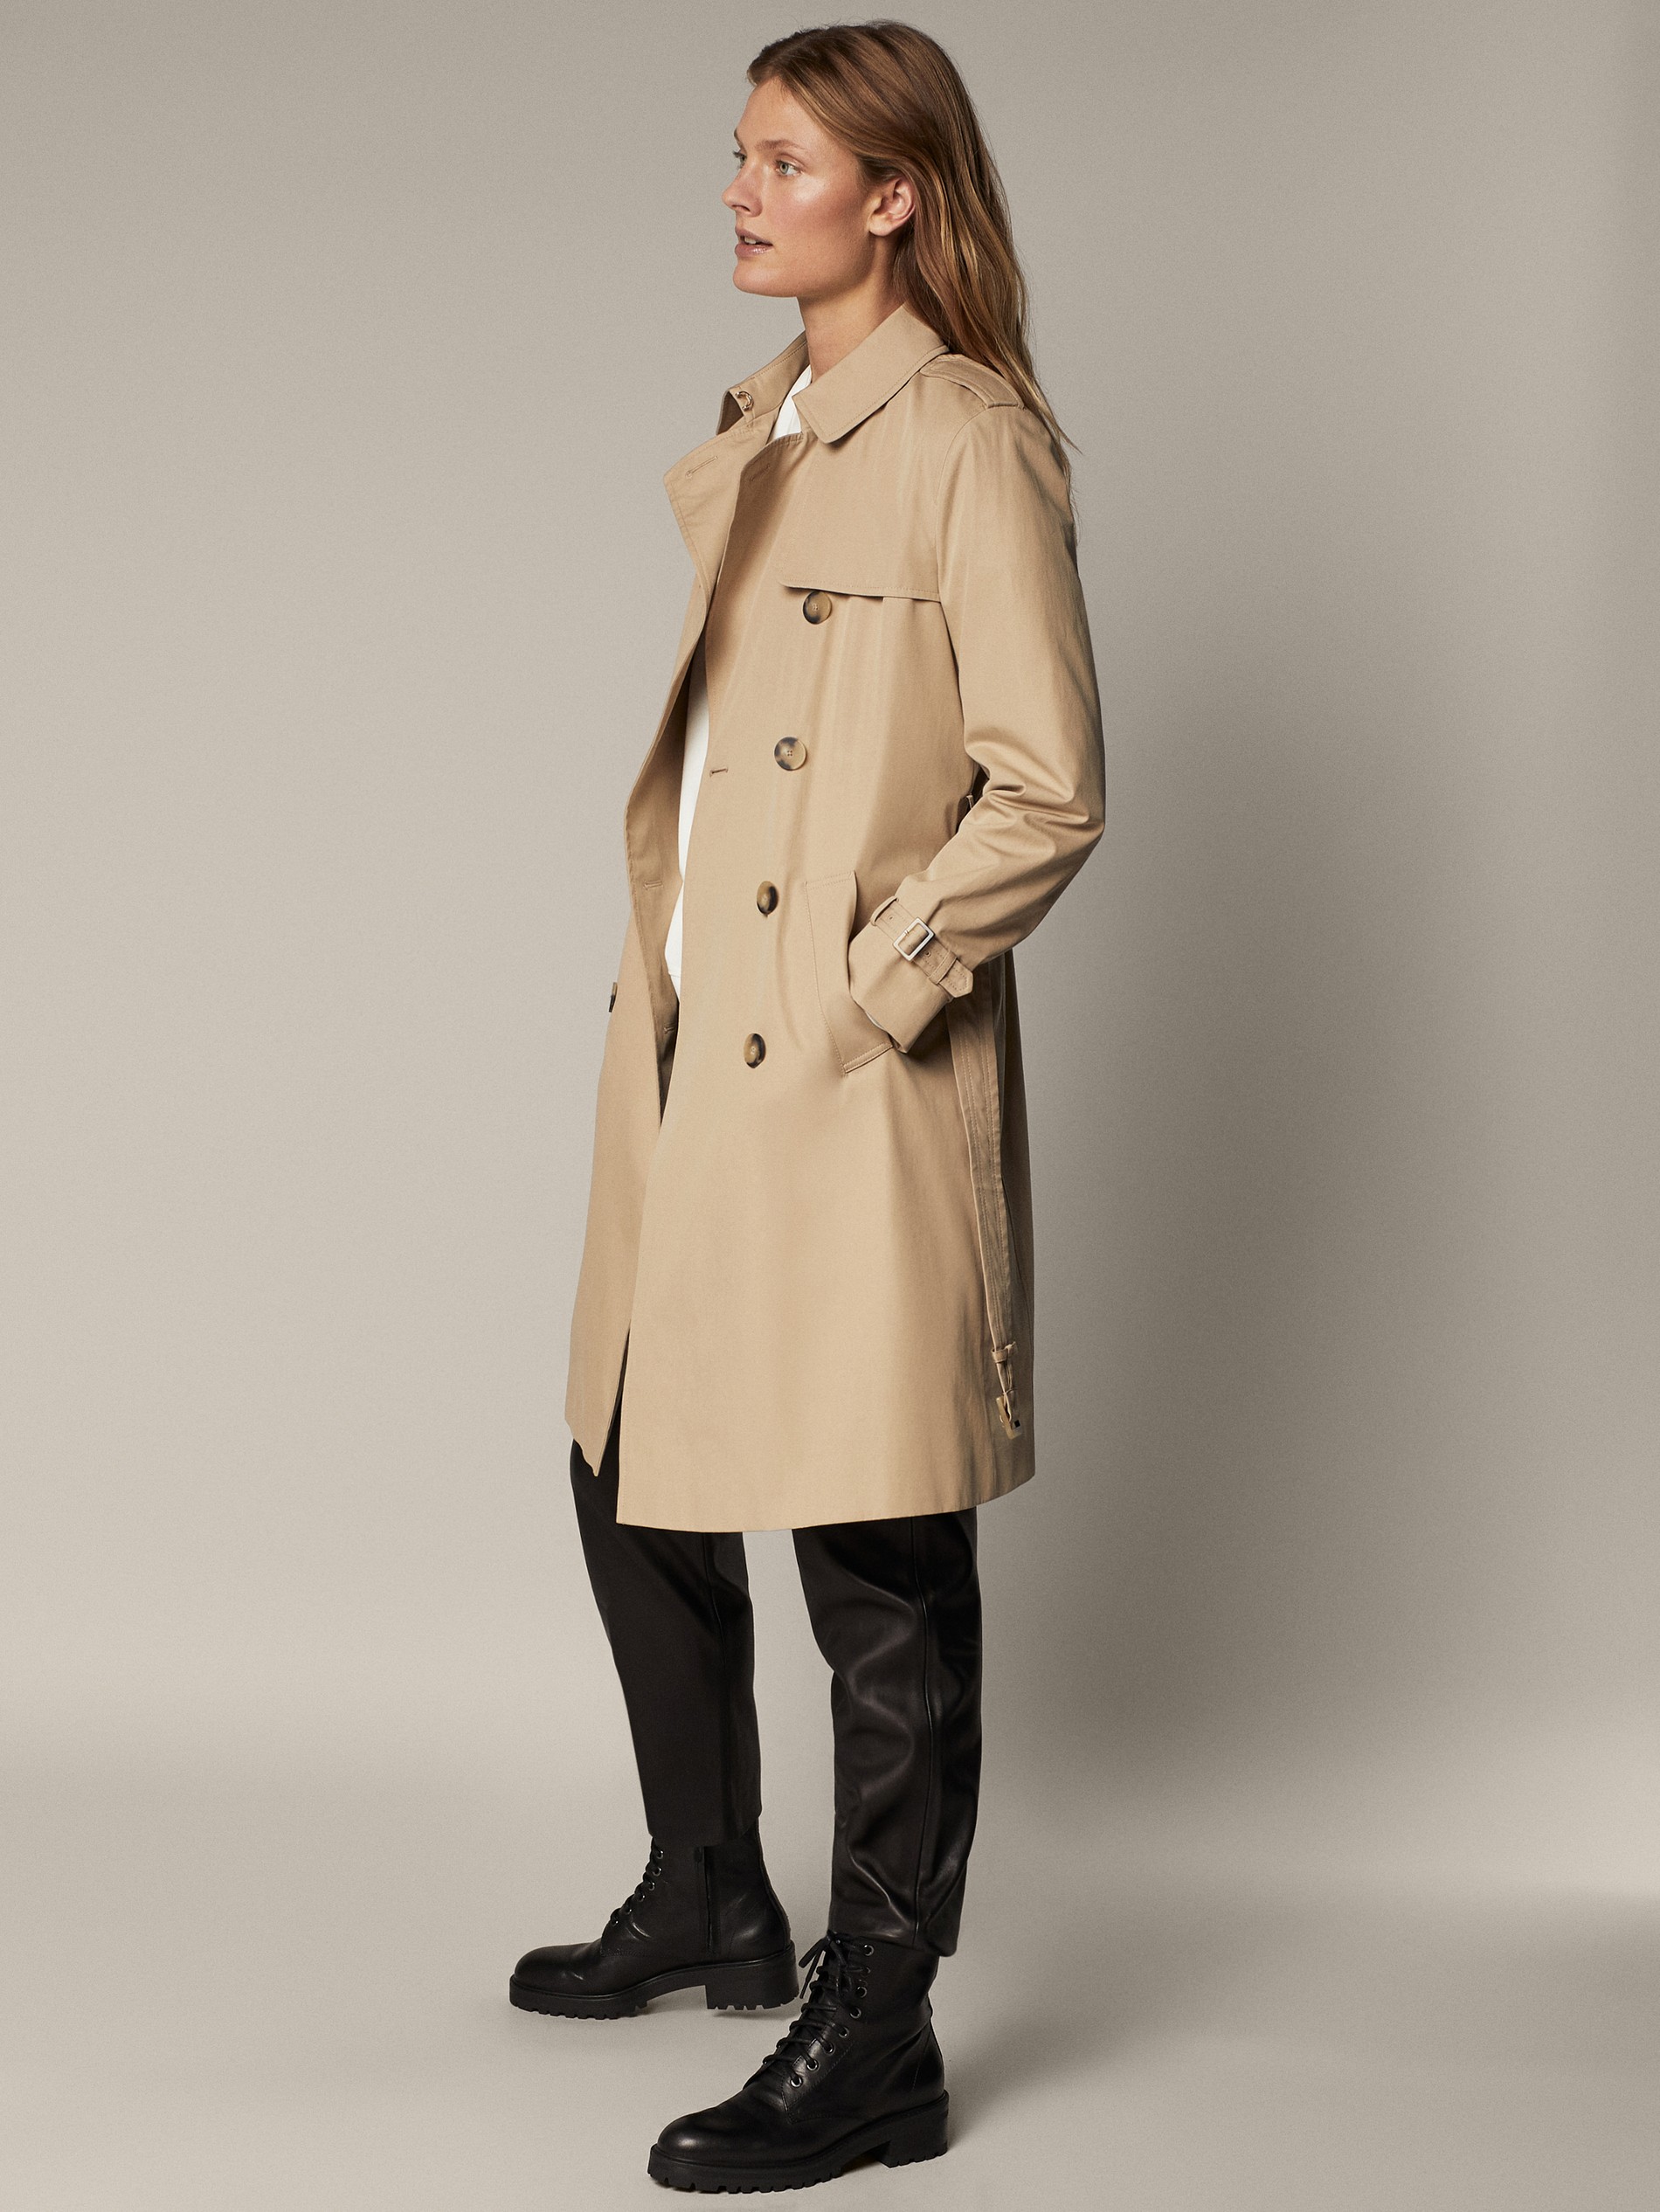 Massimo Dutti Classic Trench Coat With Houndstooth Lining - Big Apple Buddy